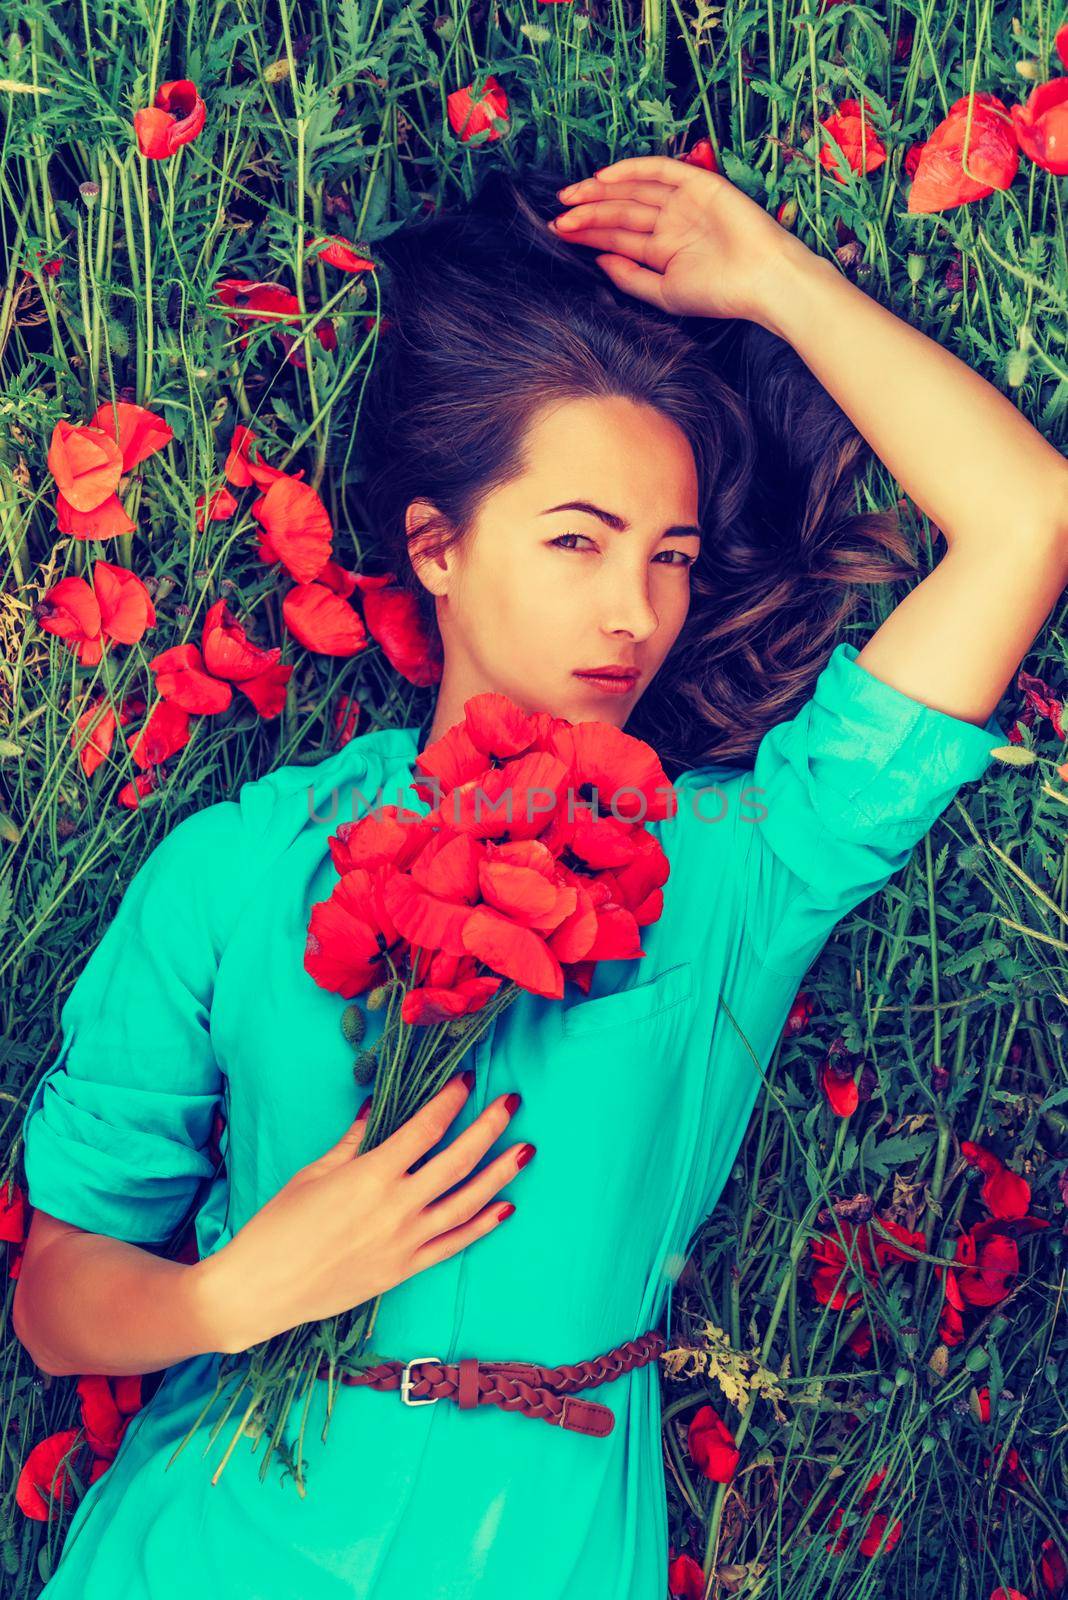 Beautiful young woman lying on red poppy meadow with bouquet of flowers, looking at camera. Beauty and fashion concept. Toned image.